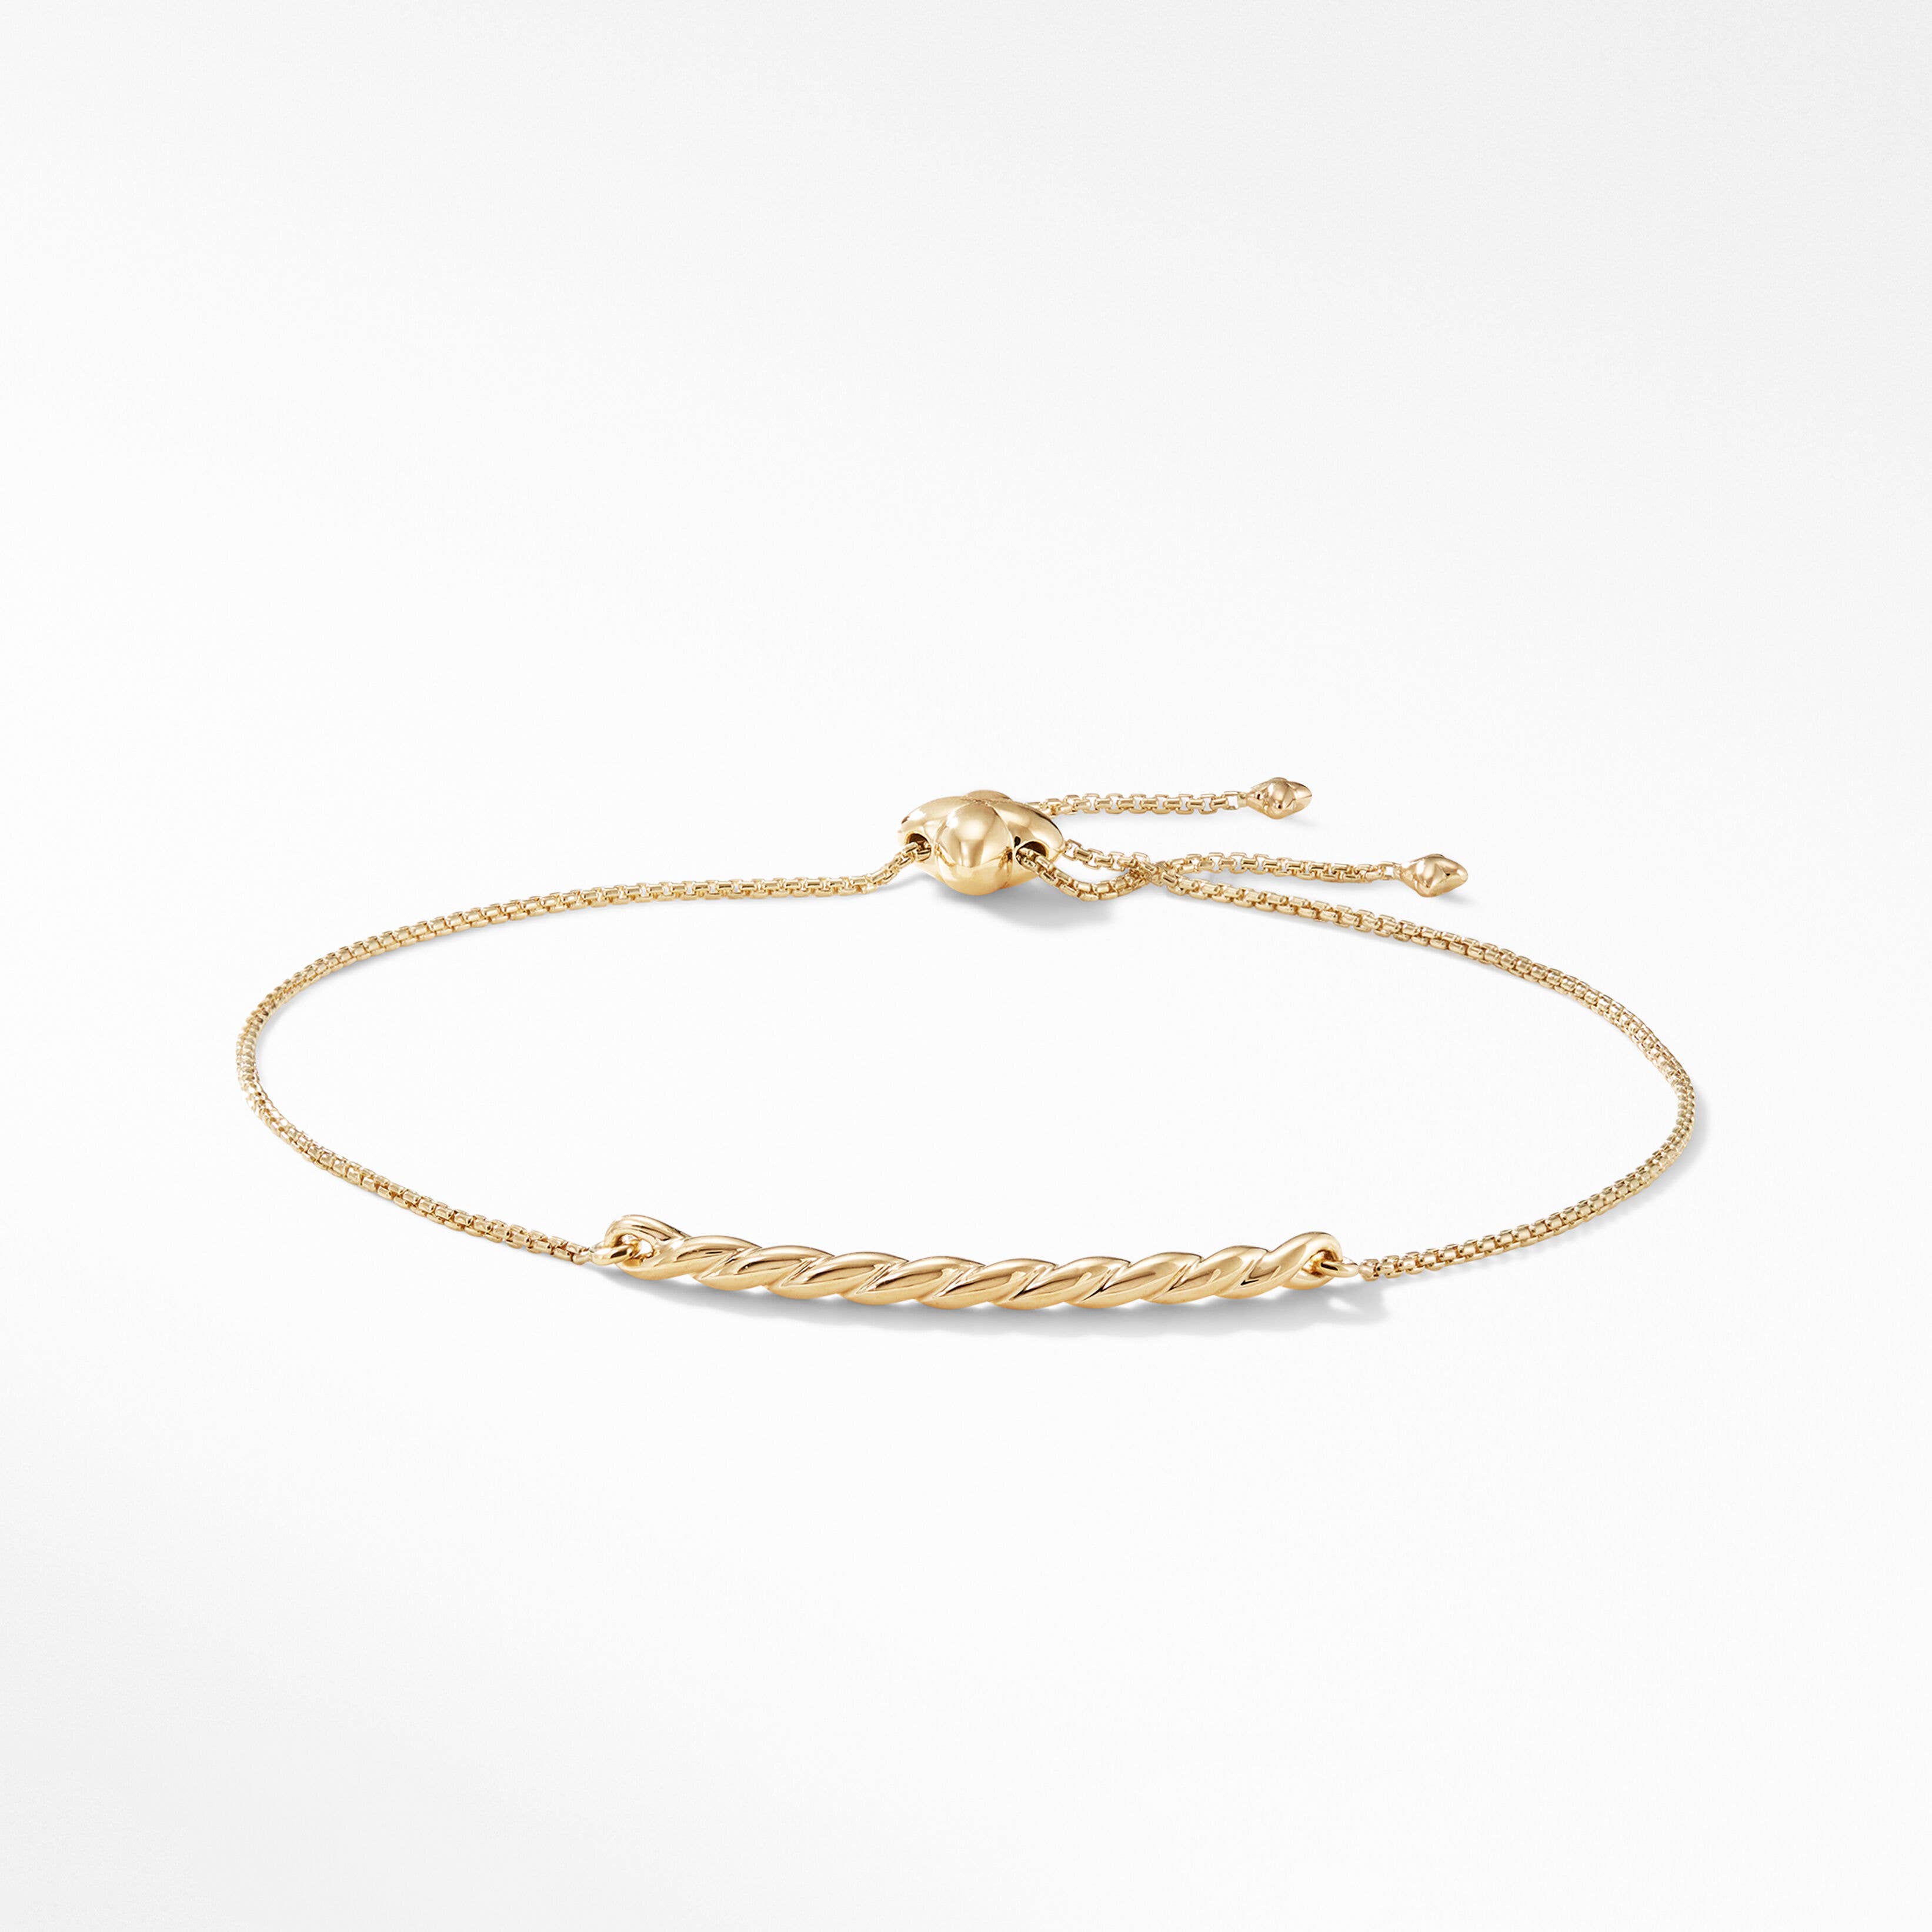 Petite Station Chain Bracelet in 18K Yellow Gold